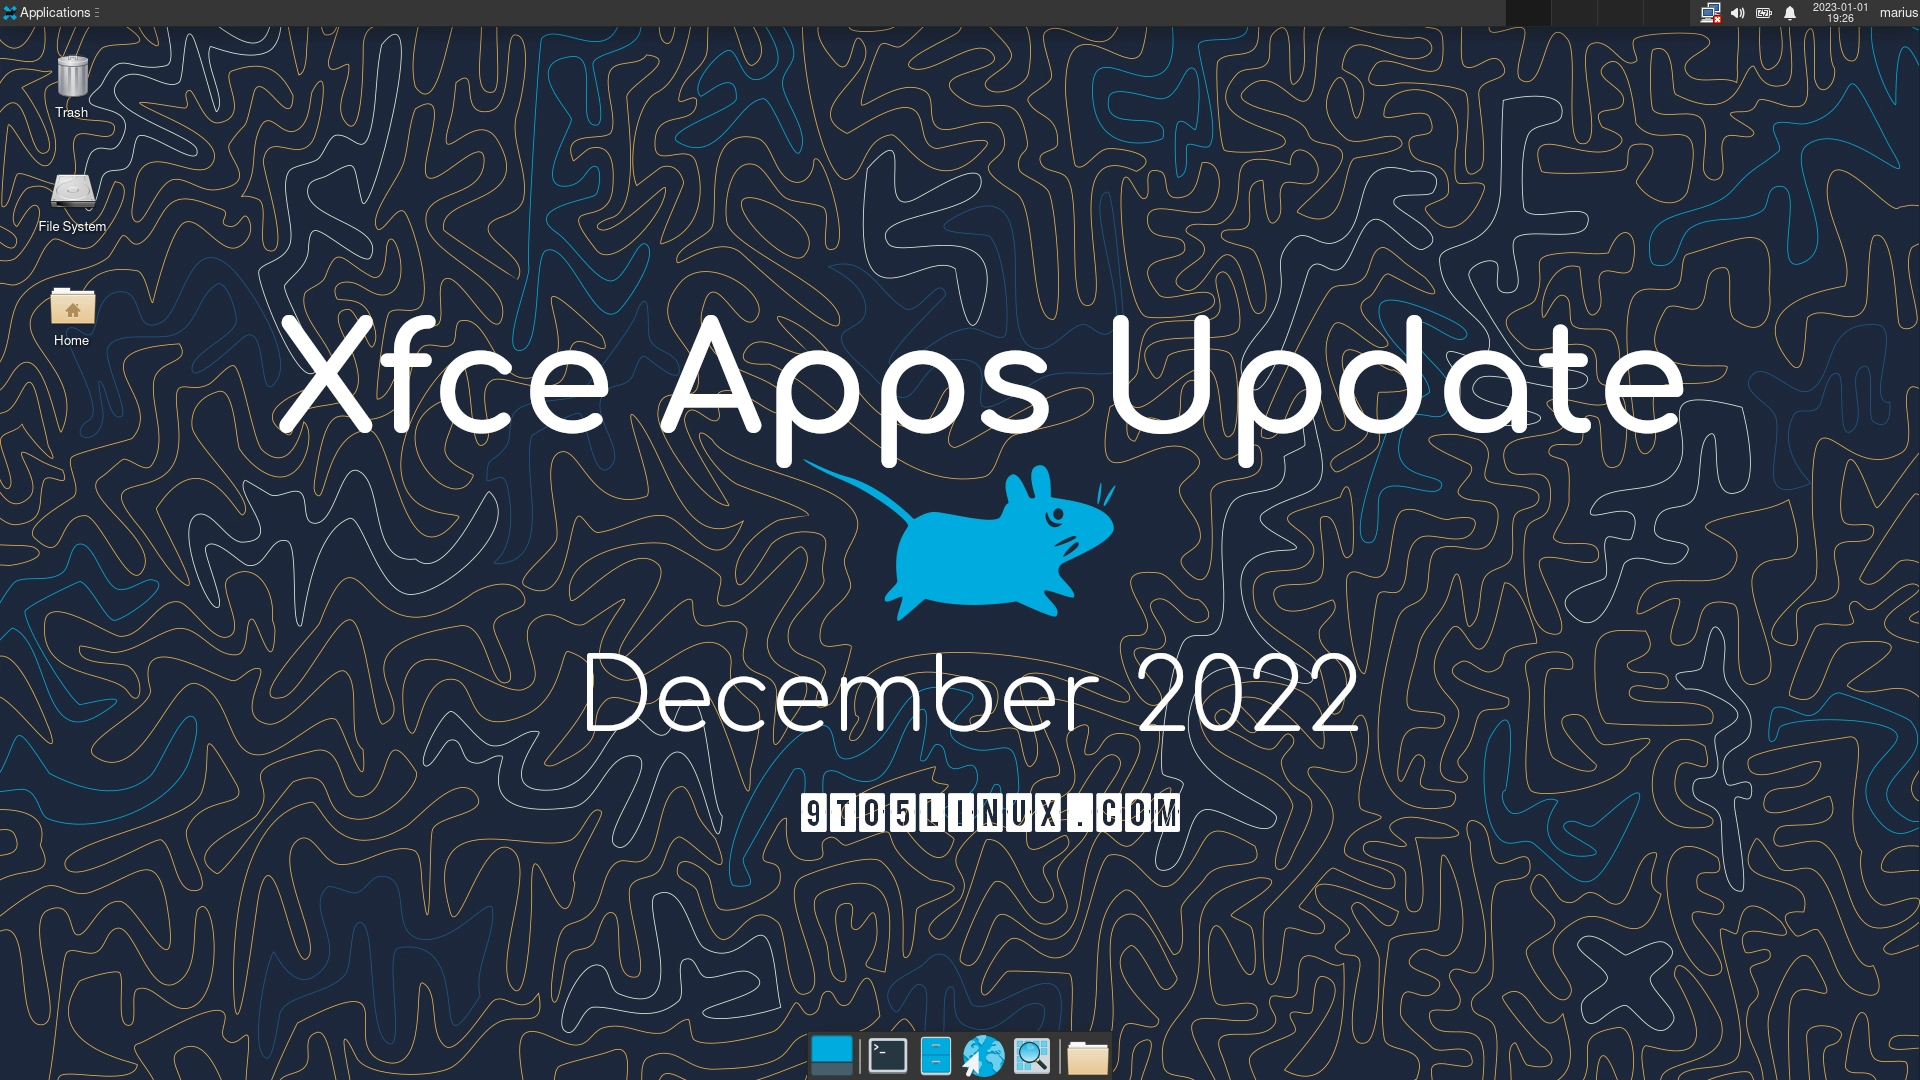 Xfce’s Apps Update for December 2022: New Releases of Ristretto, Thunar, Screenshooter, and More